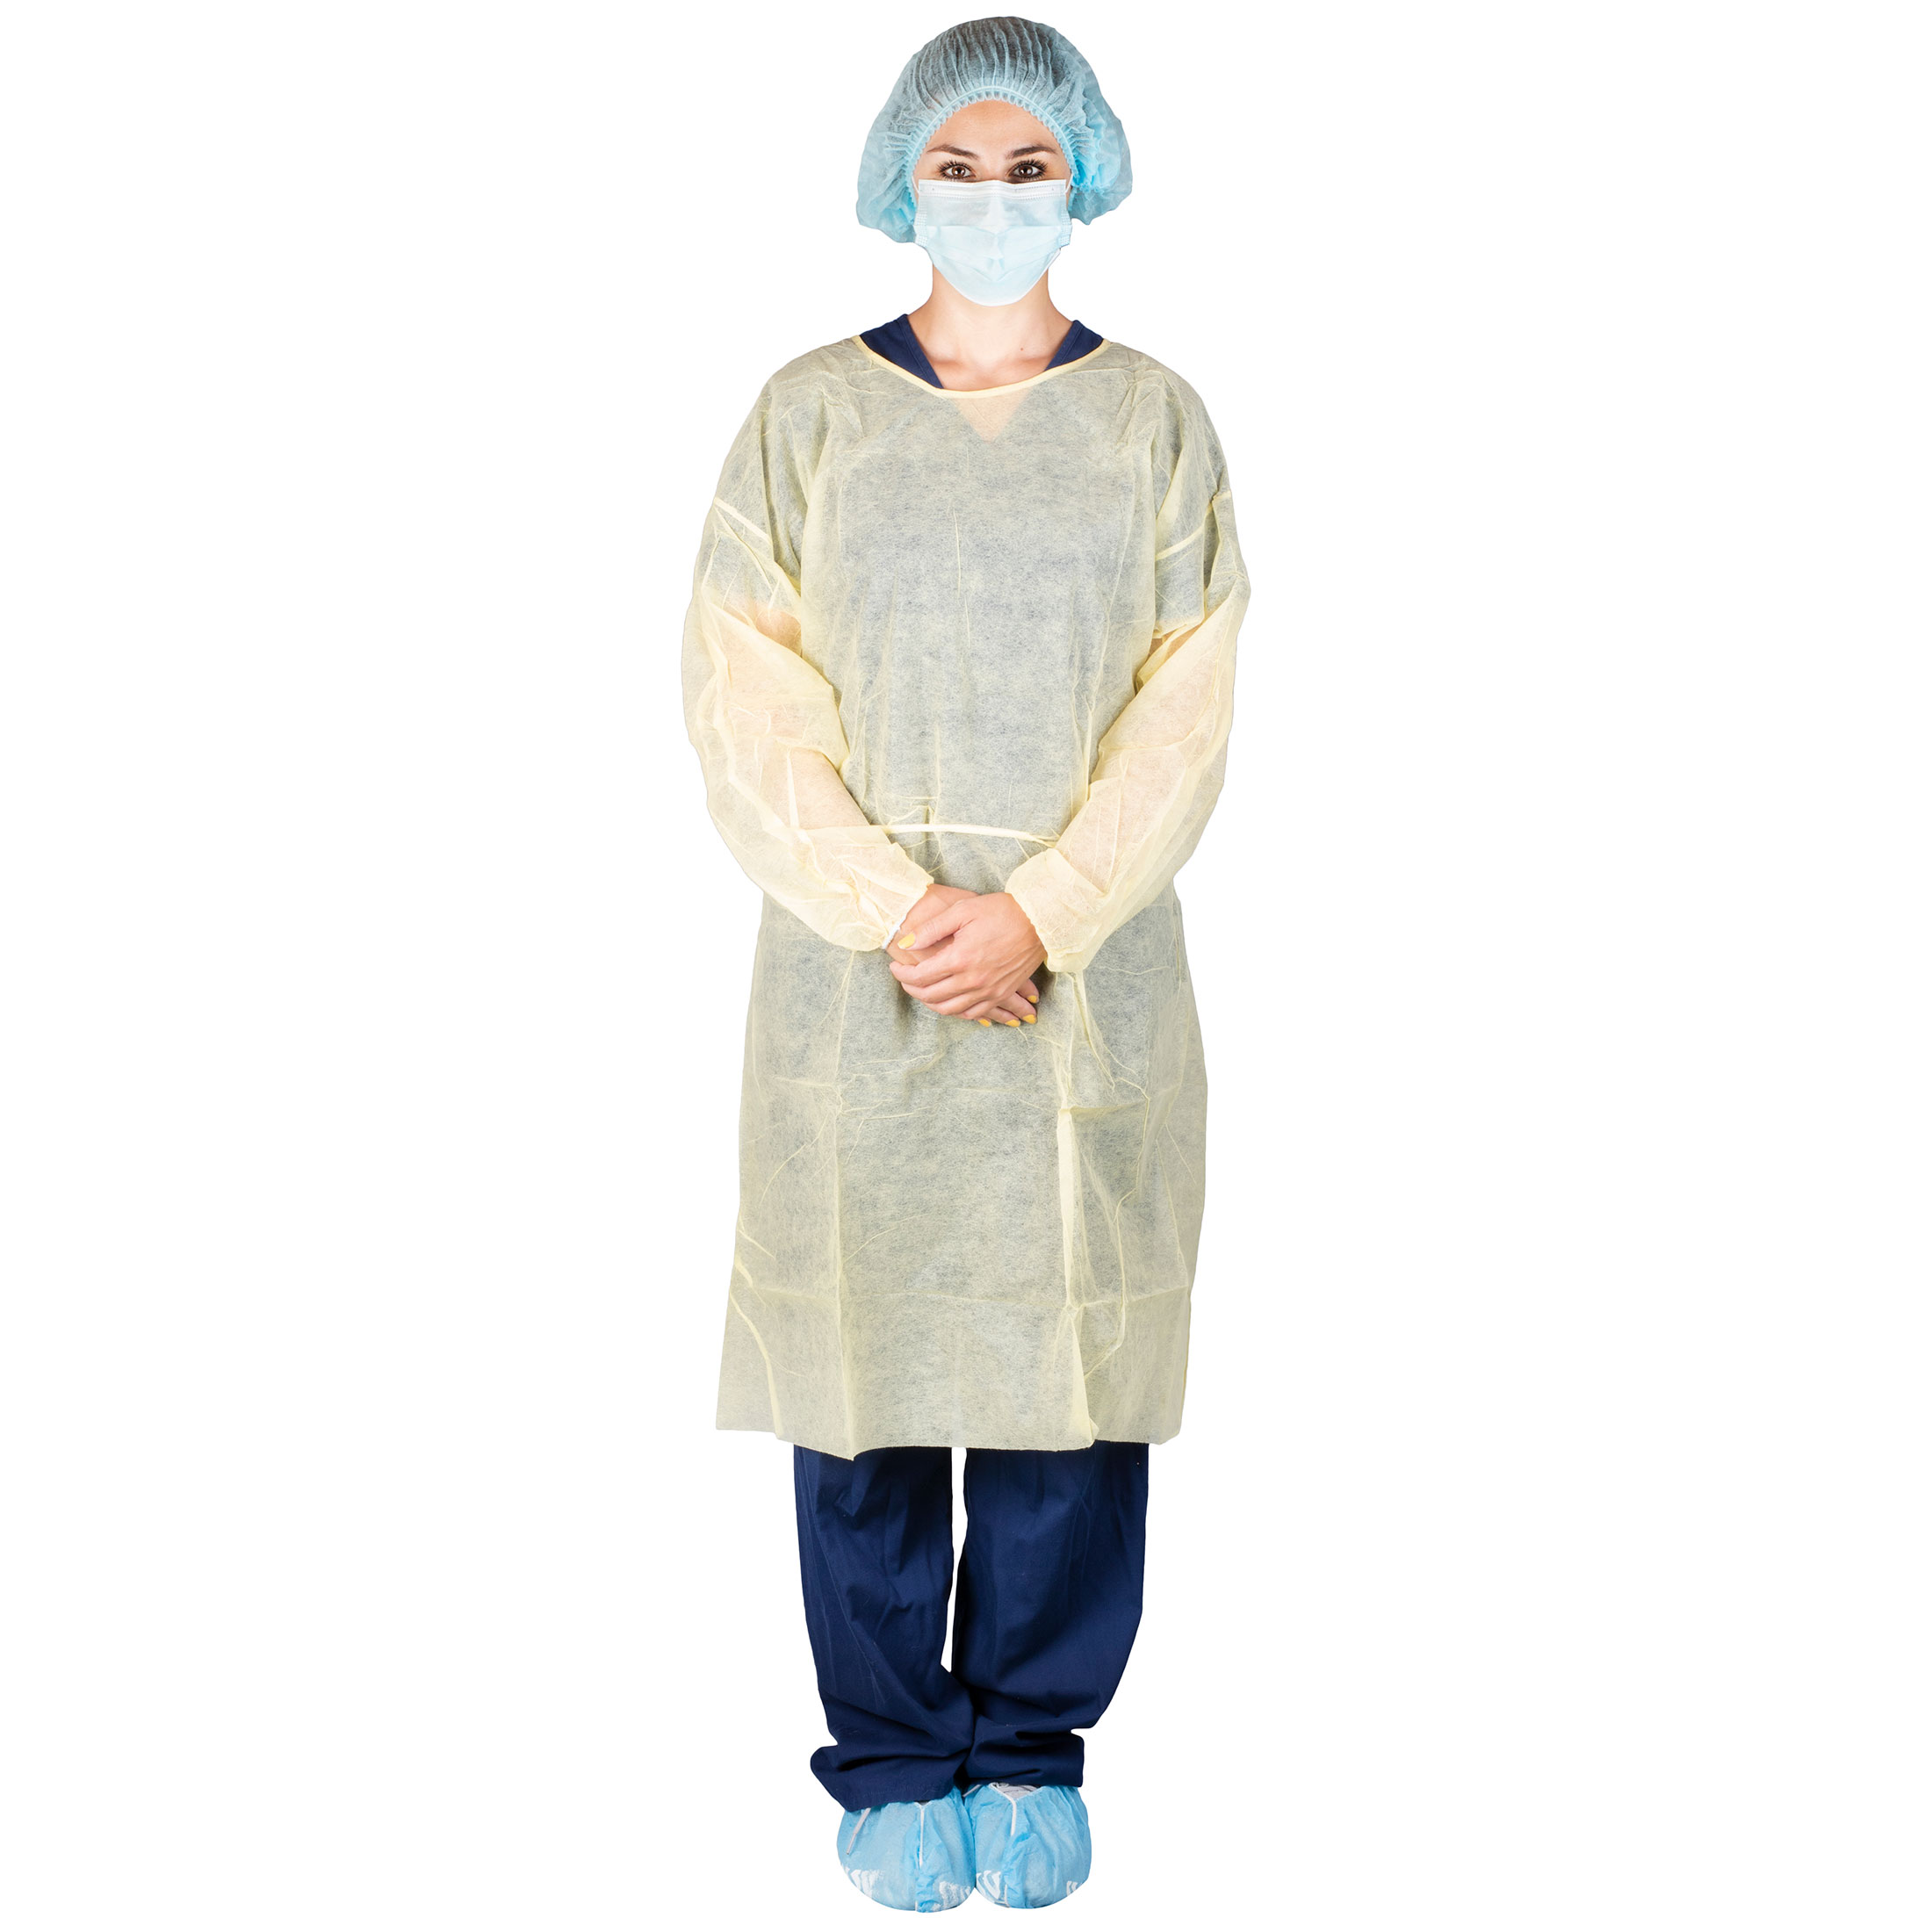 Isolation & Surgical Gowns Products, Supplies and Equipment